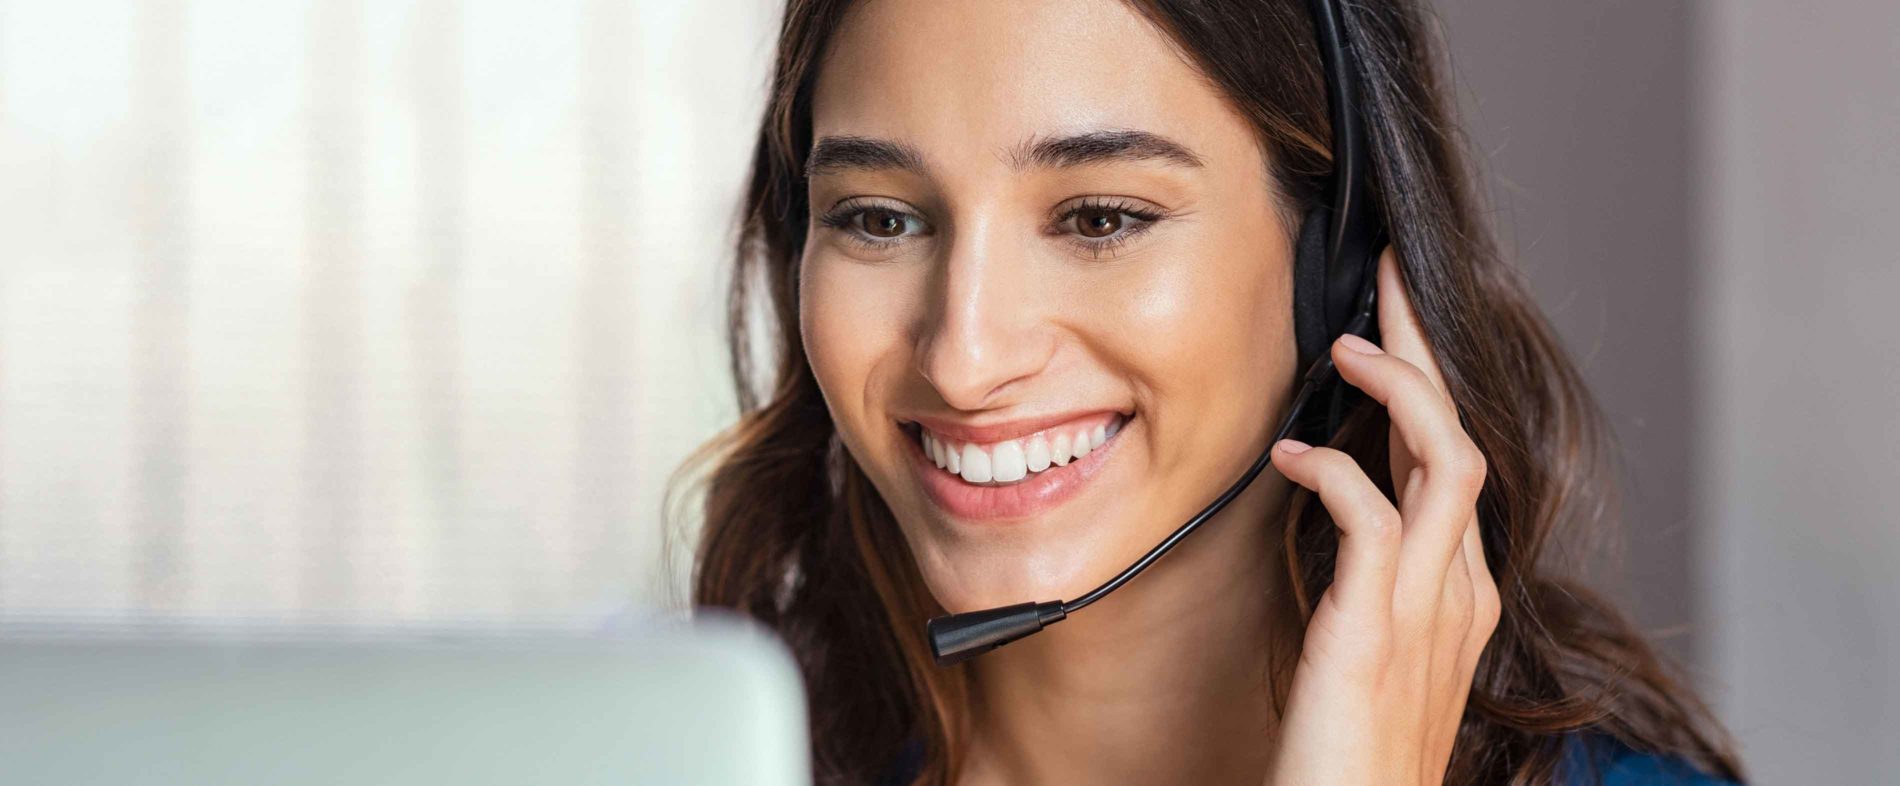 A woman wearing a headset and smiling at a computer